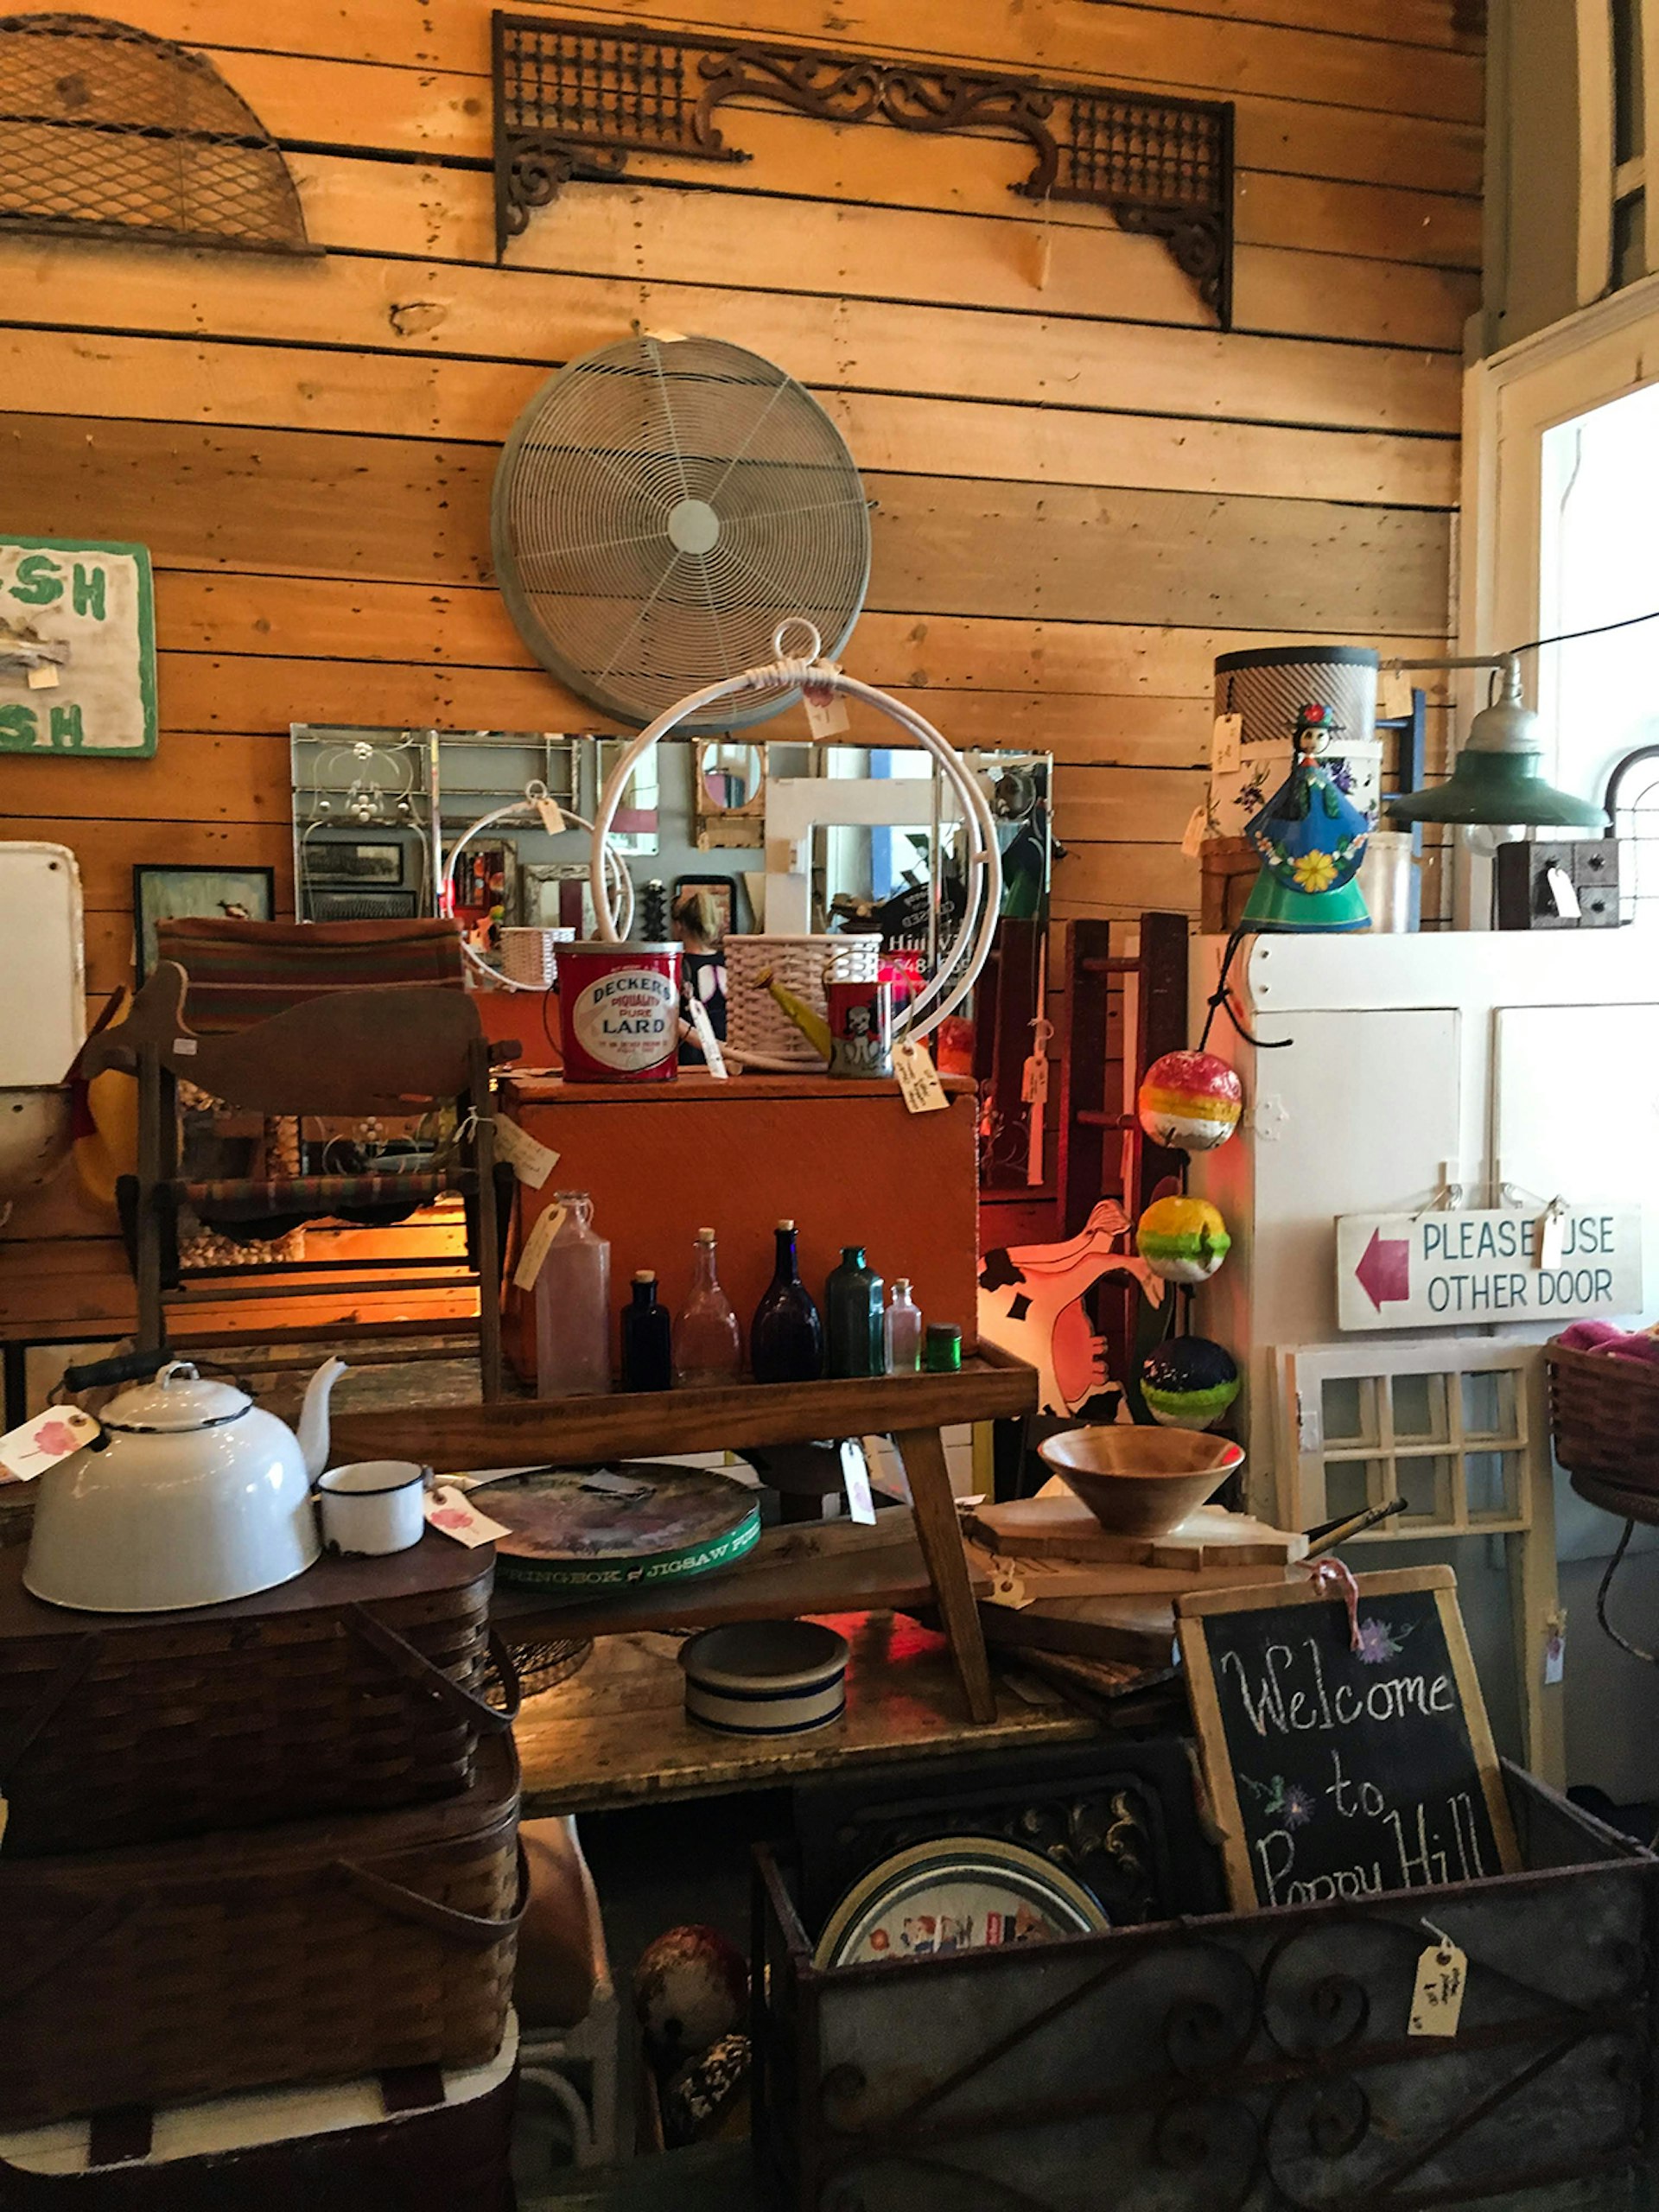 Shop interior in Harbor Country Michigan with a wooden wall filled with vintage housewares, including a white cabinet, an enamel teapot and a huge metal fan